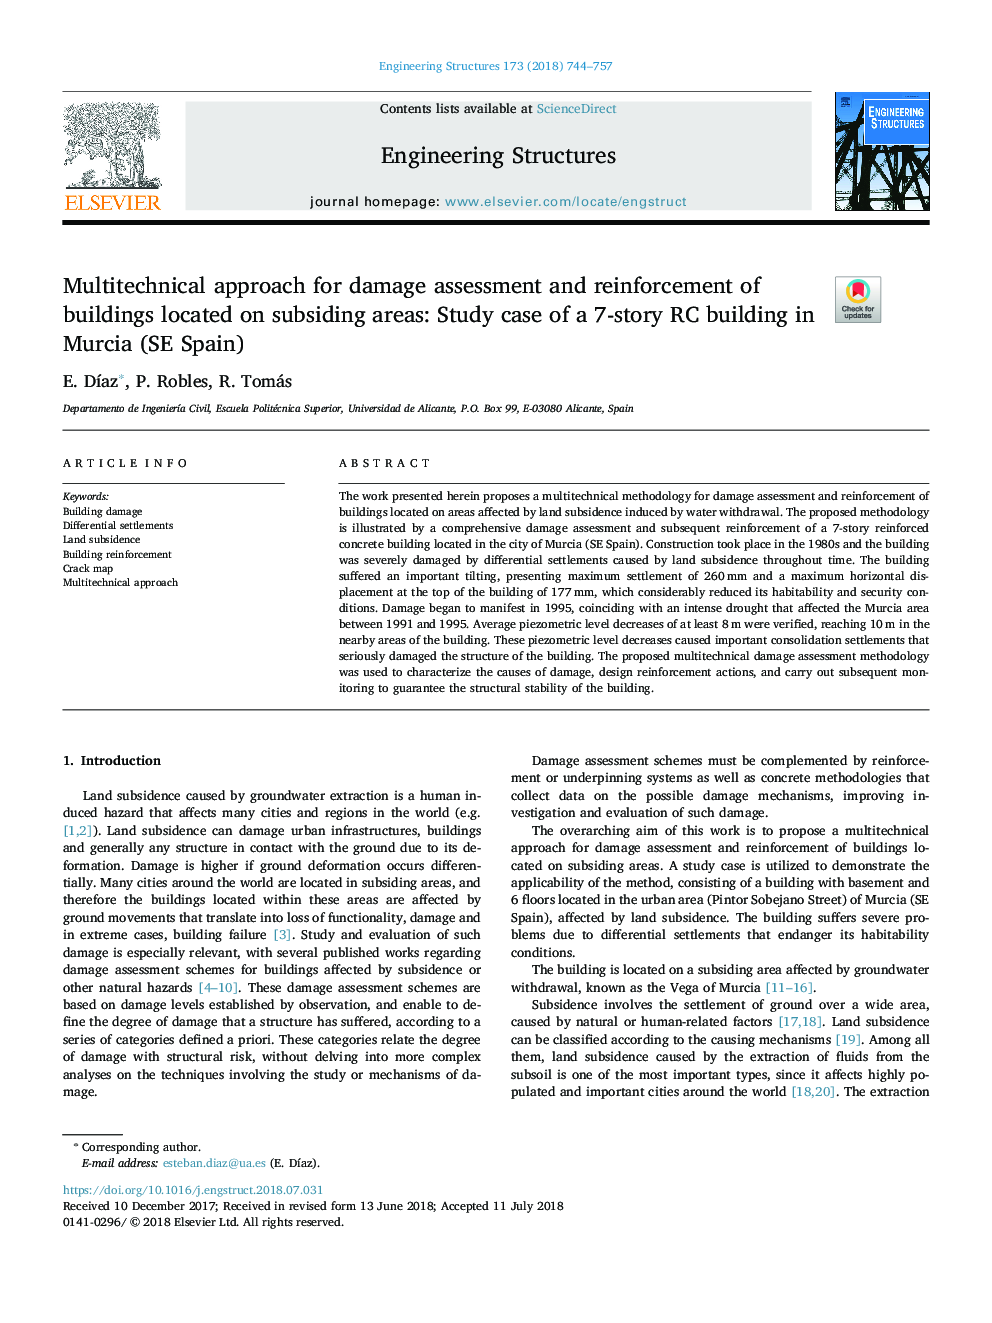 Multitechnical approach for damage assessment and reinforcement of buildings located on subsiding areas: Study case of a 7-story RC building in Murcia (SE Spain)